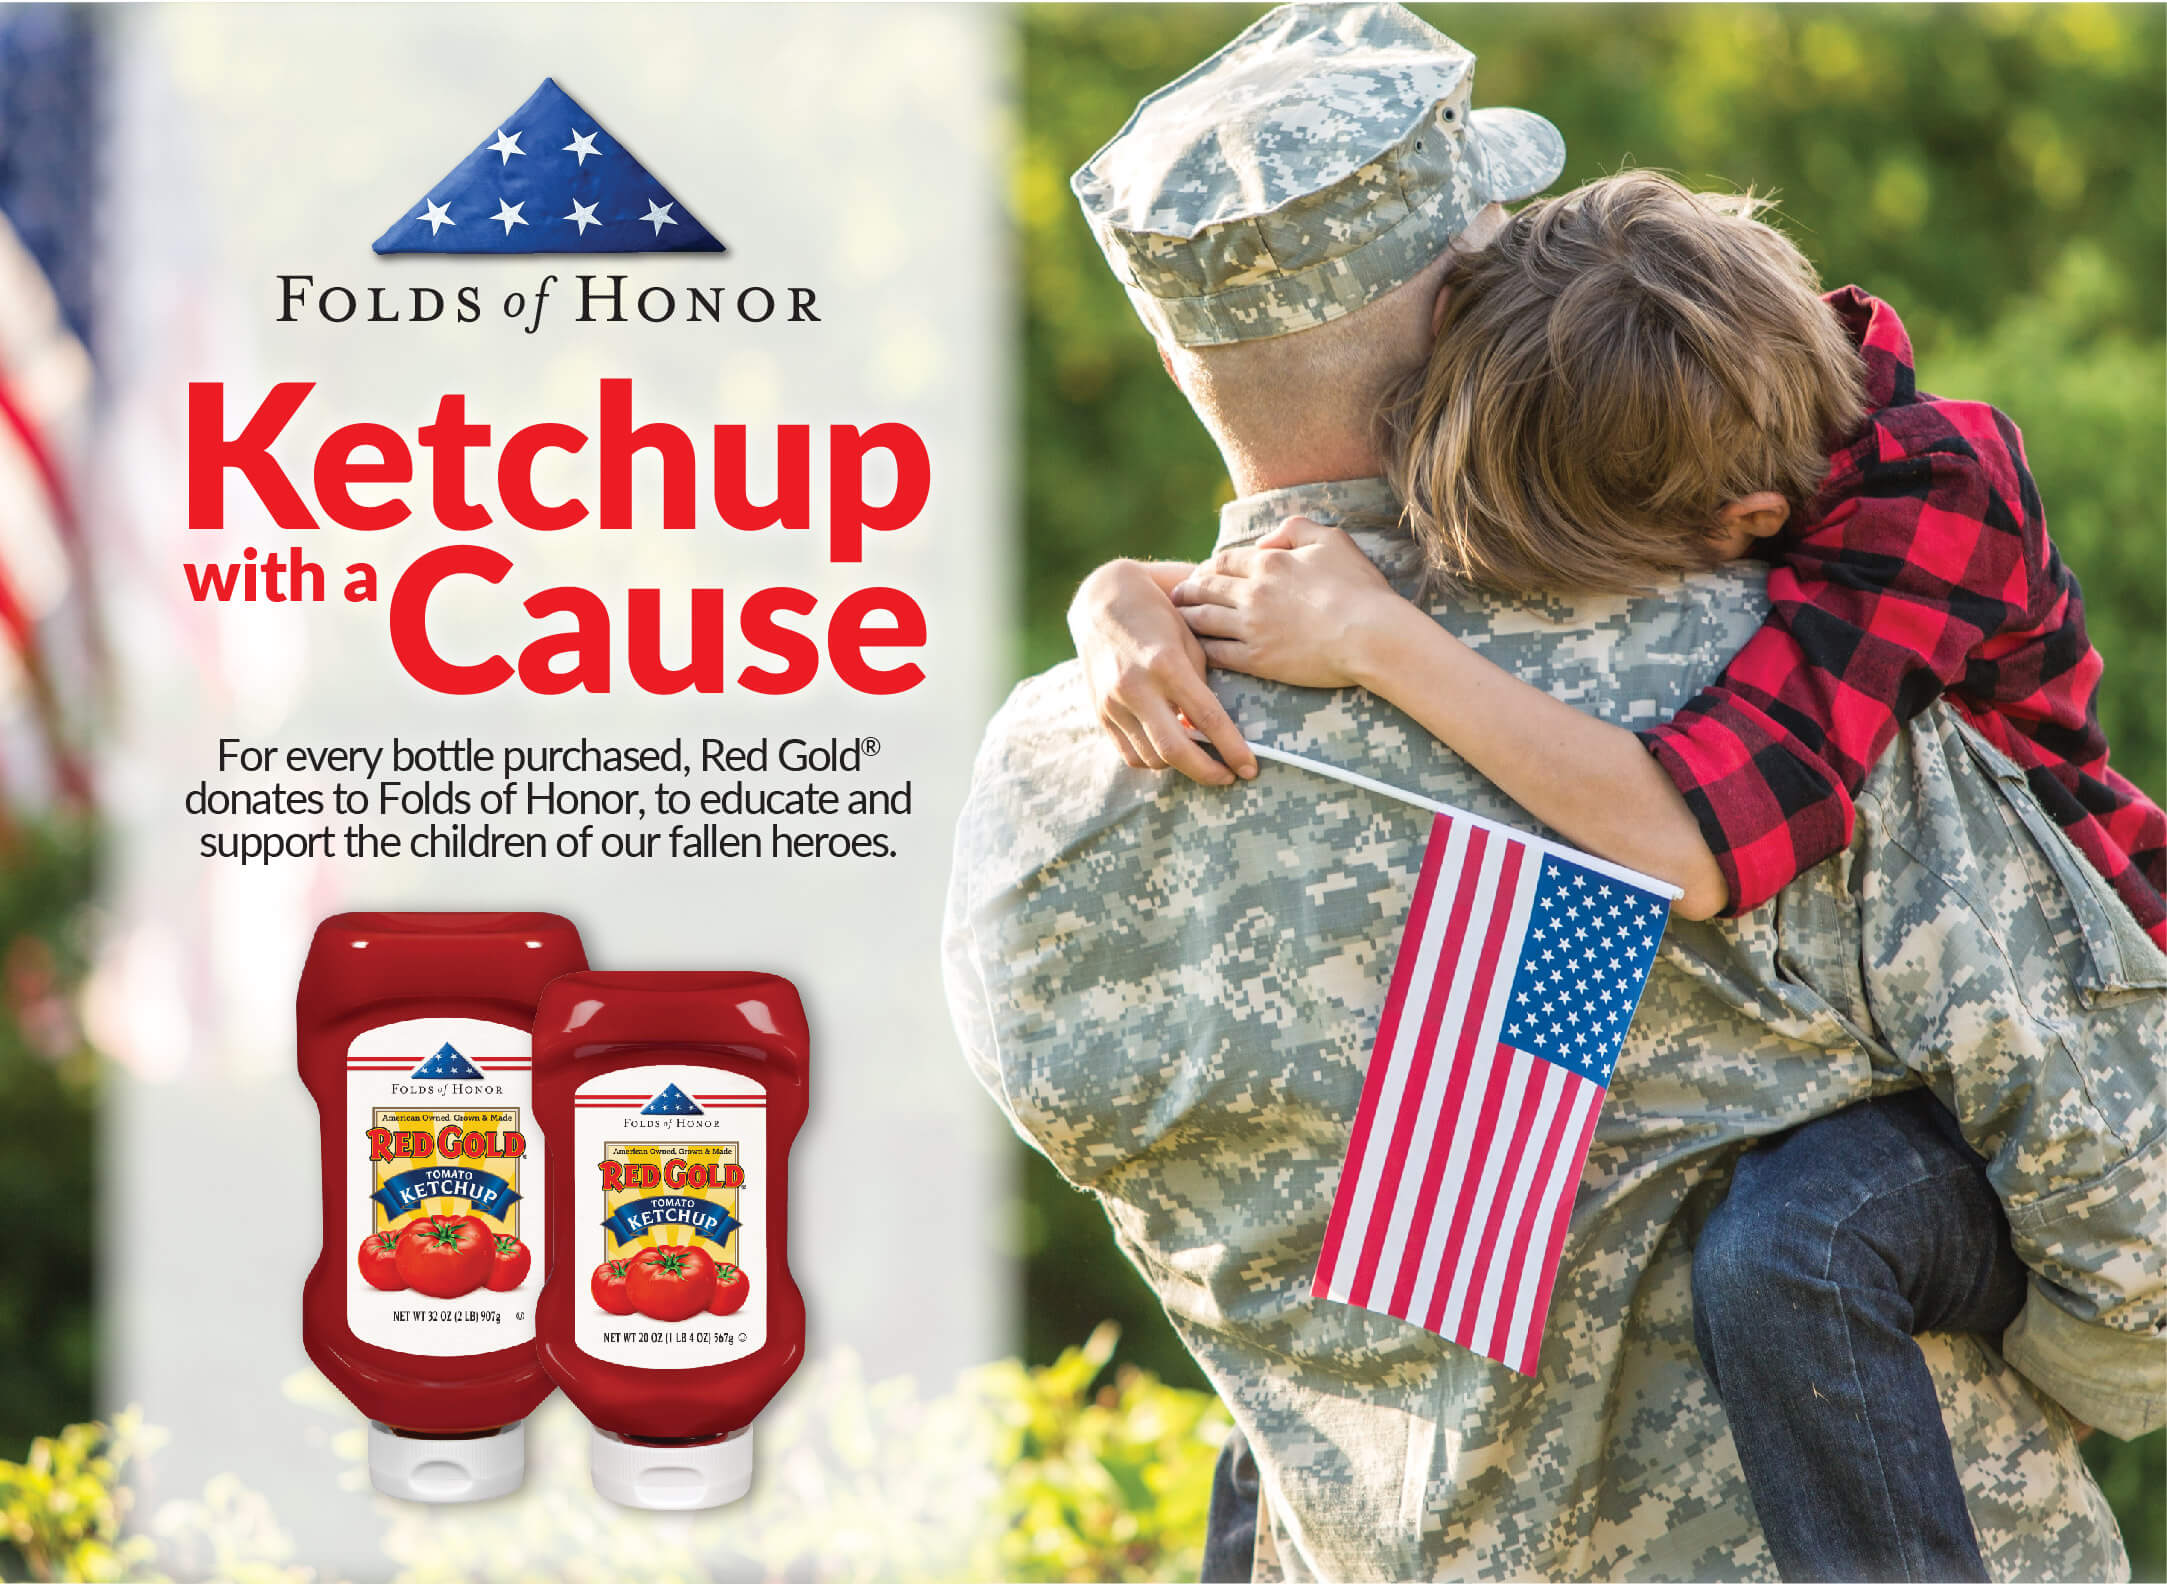 Red Gold Folds of Honor Ketchup for a Cause